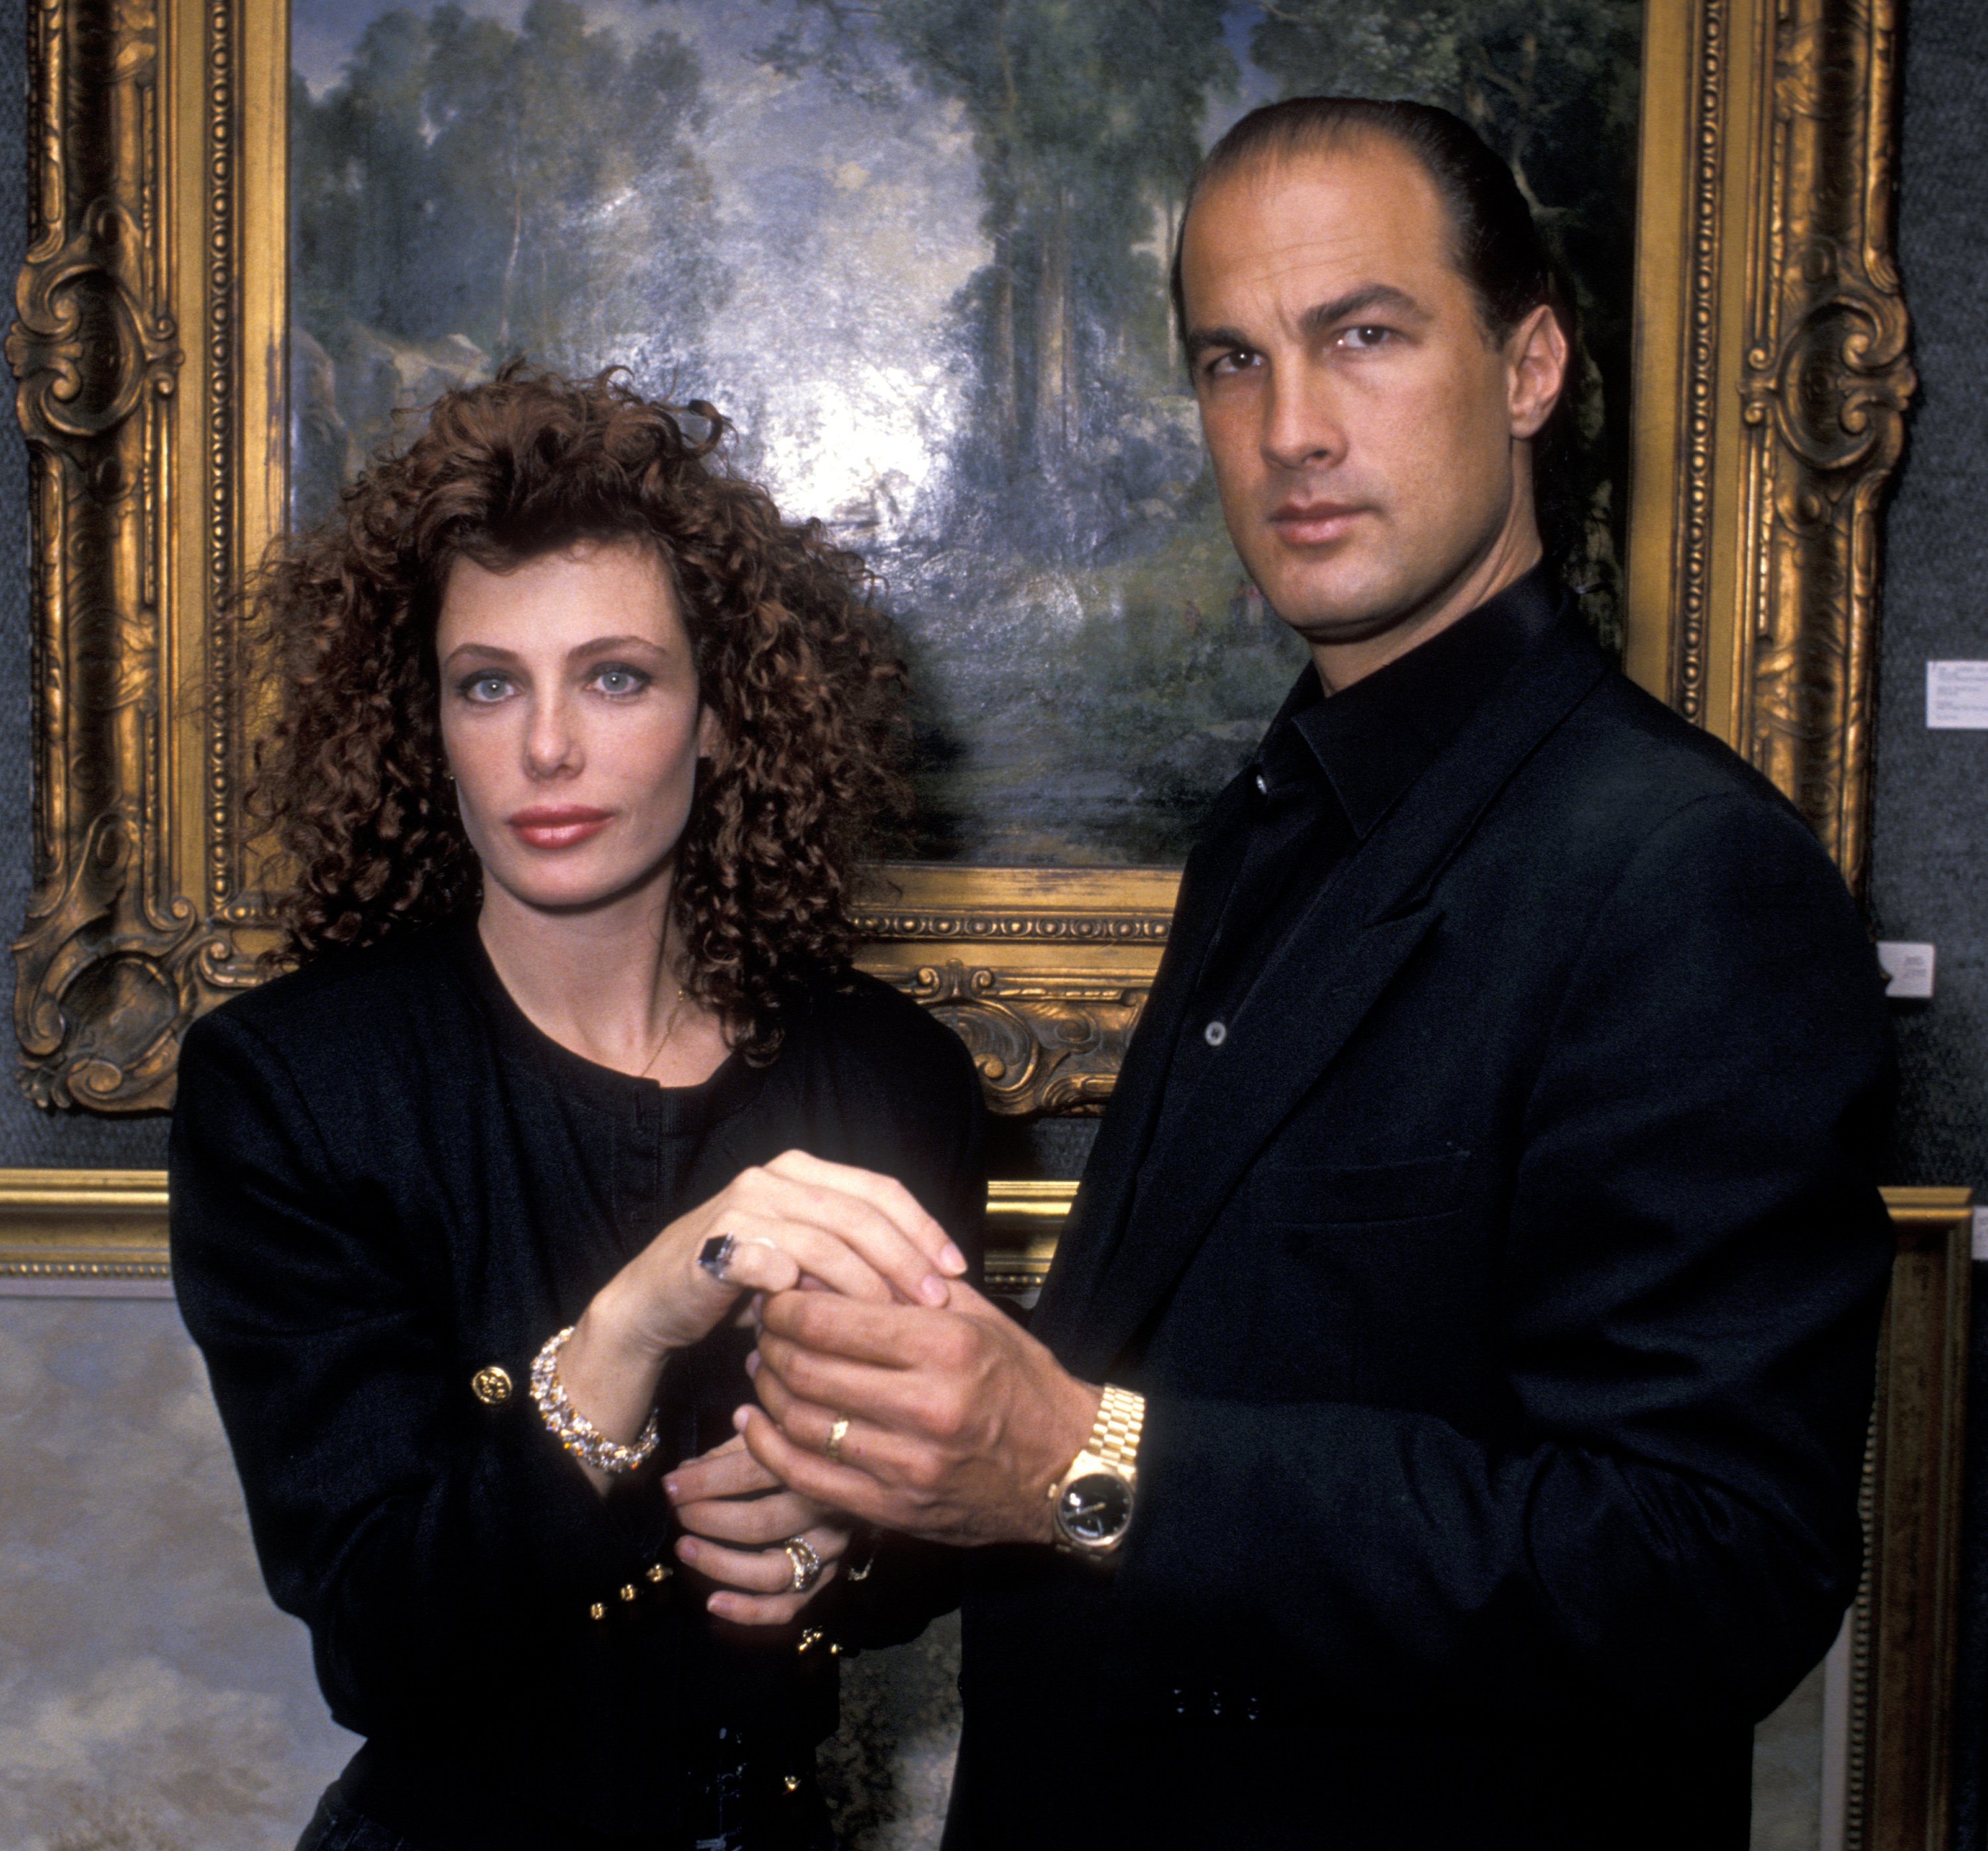 Model Kelly LeBrock and Steven Seagal pictured at Butterfield's on November 3, 1988 in Los Angeles, California. / Source: Getty Images